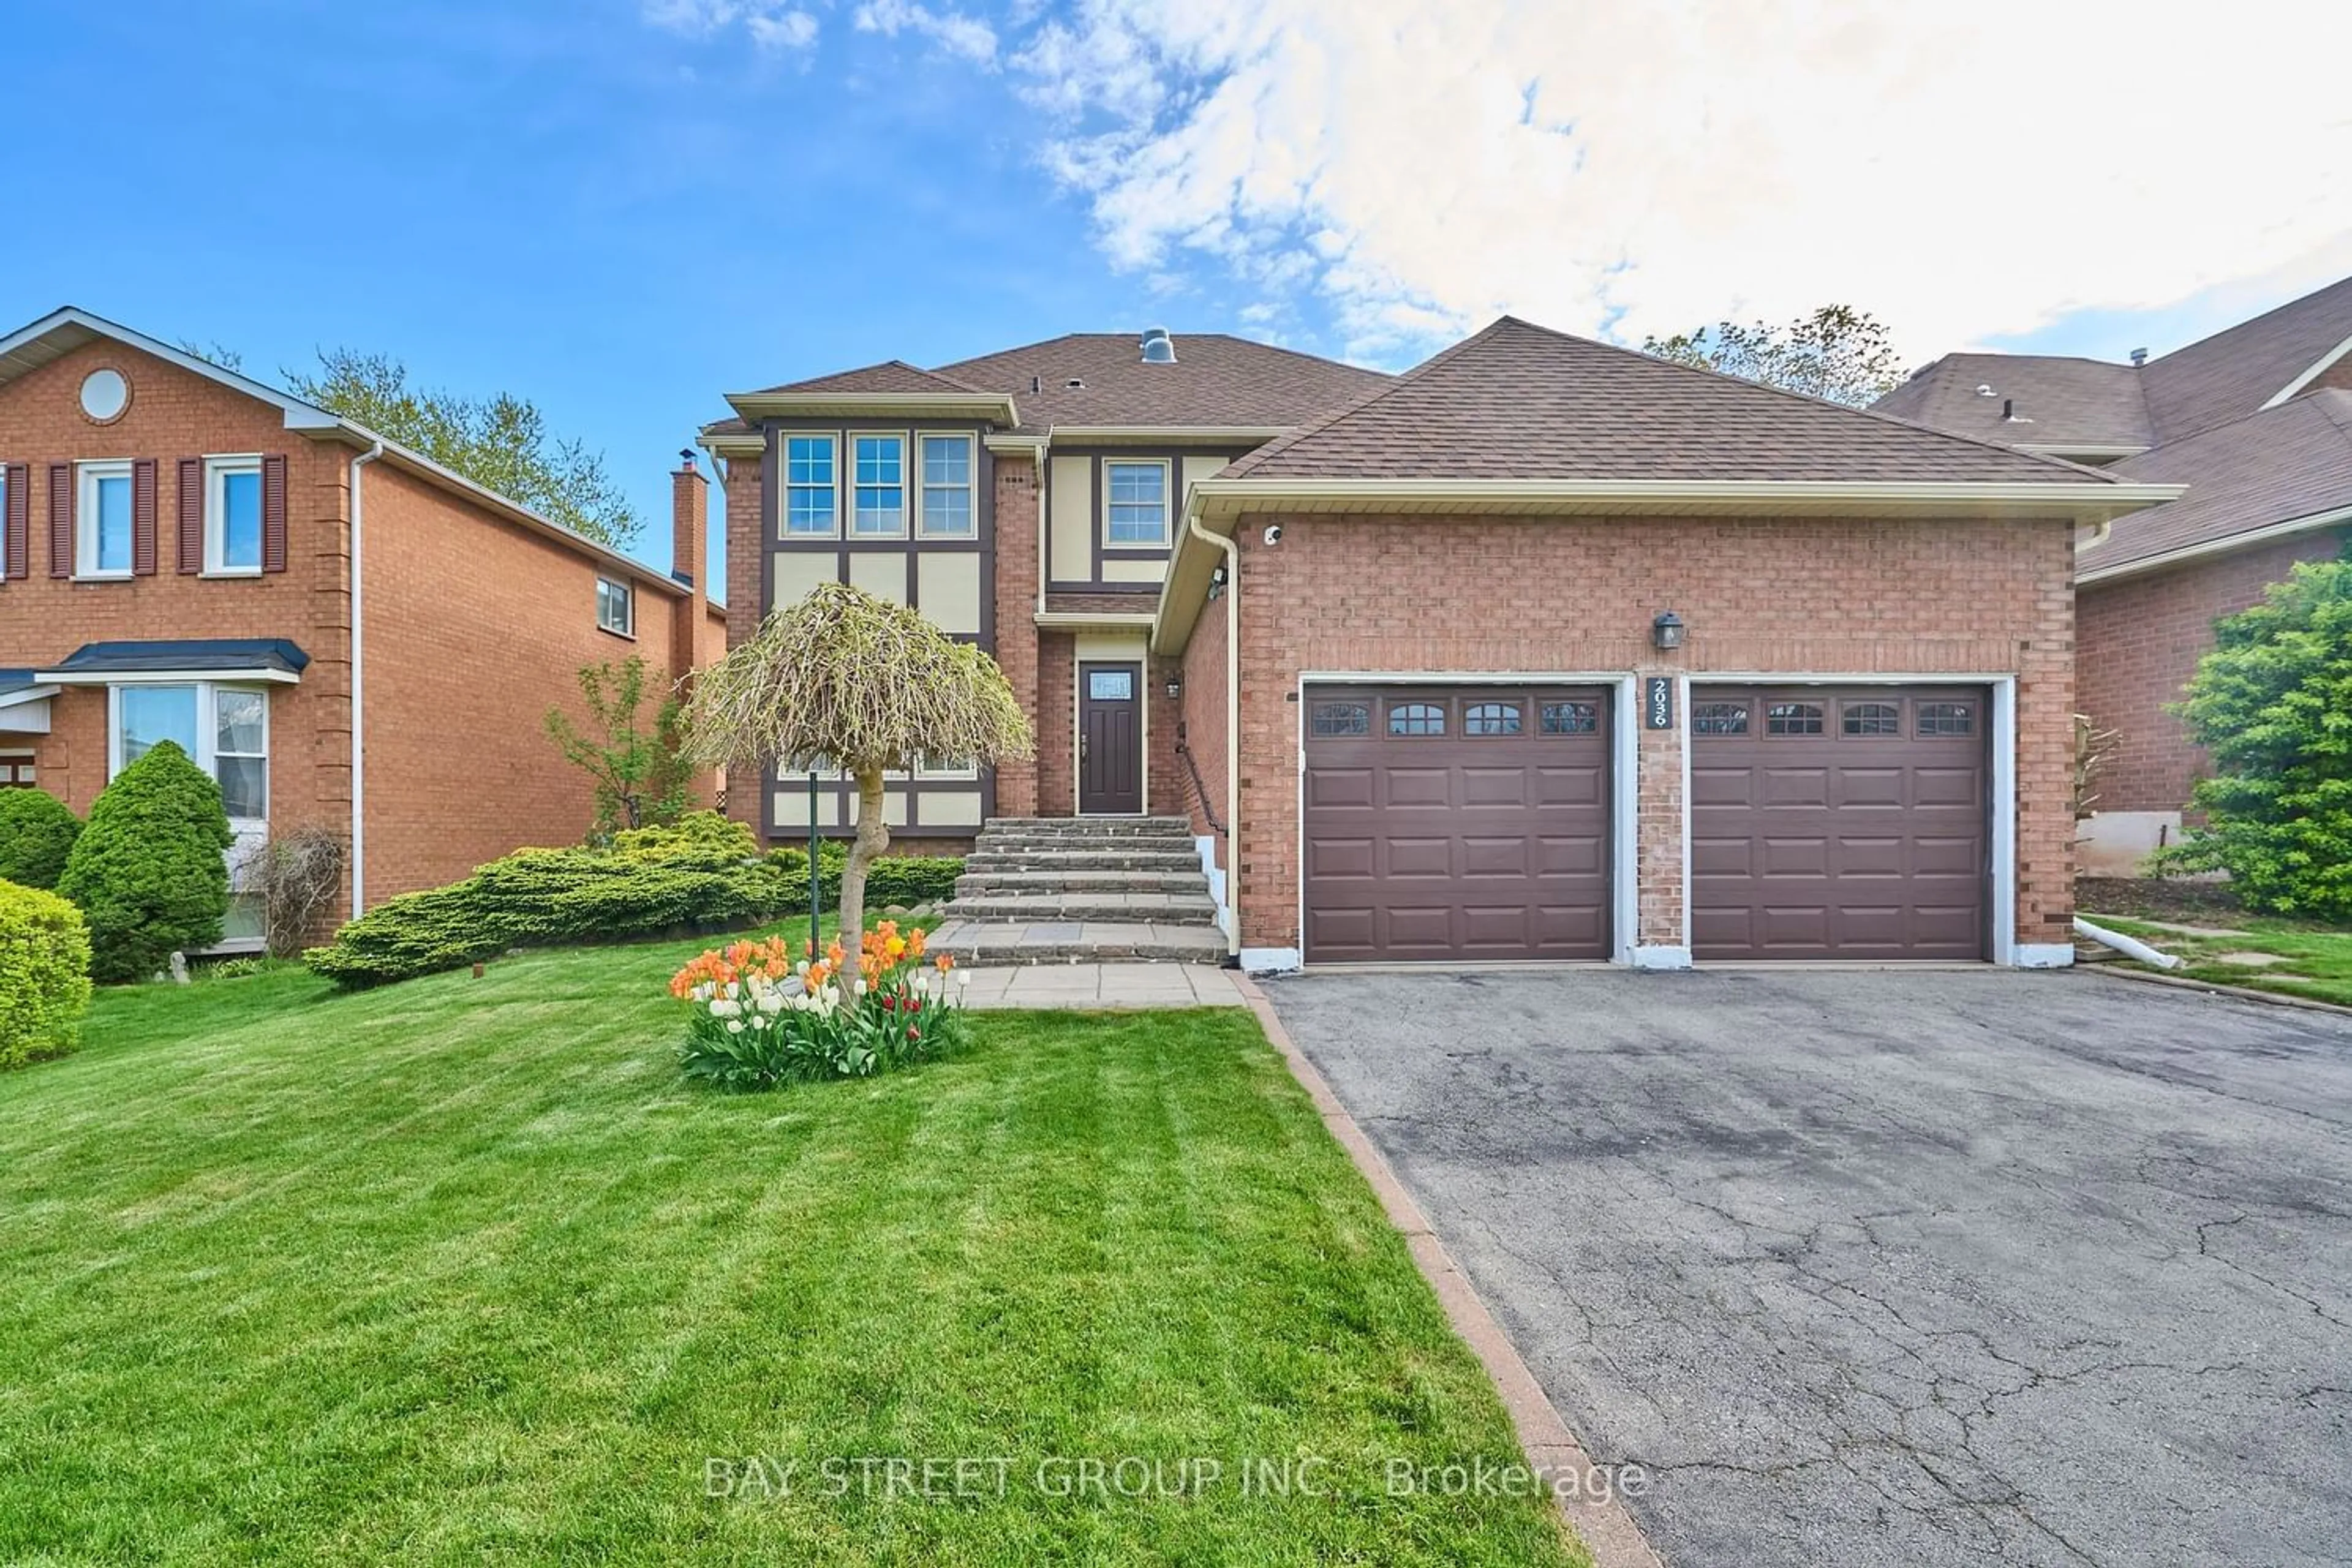 Home with brick exterior material for 2036 Grand Blvd, Oakville Ontario L6H 4X5